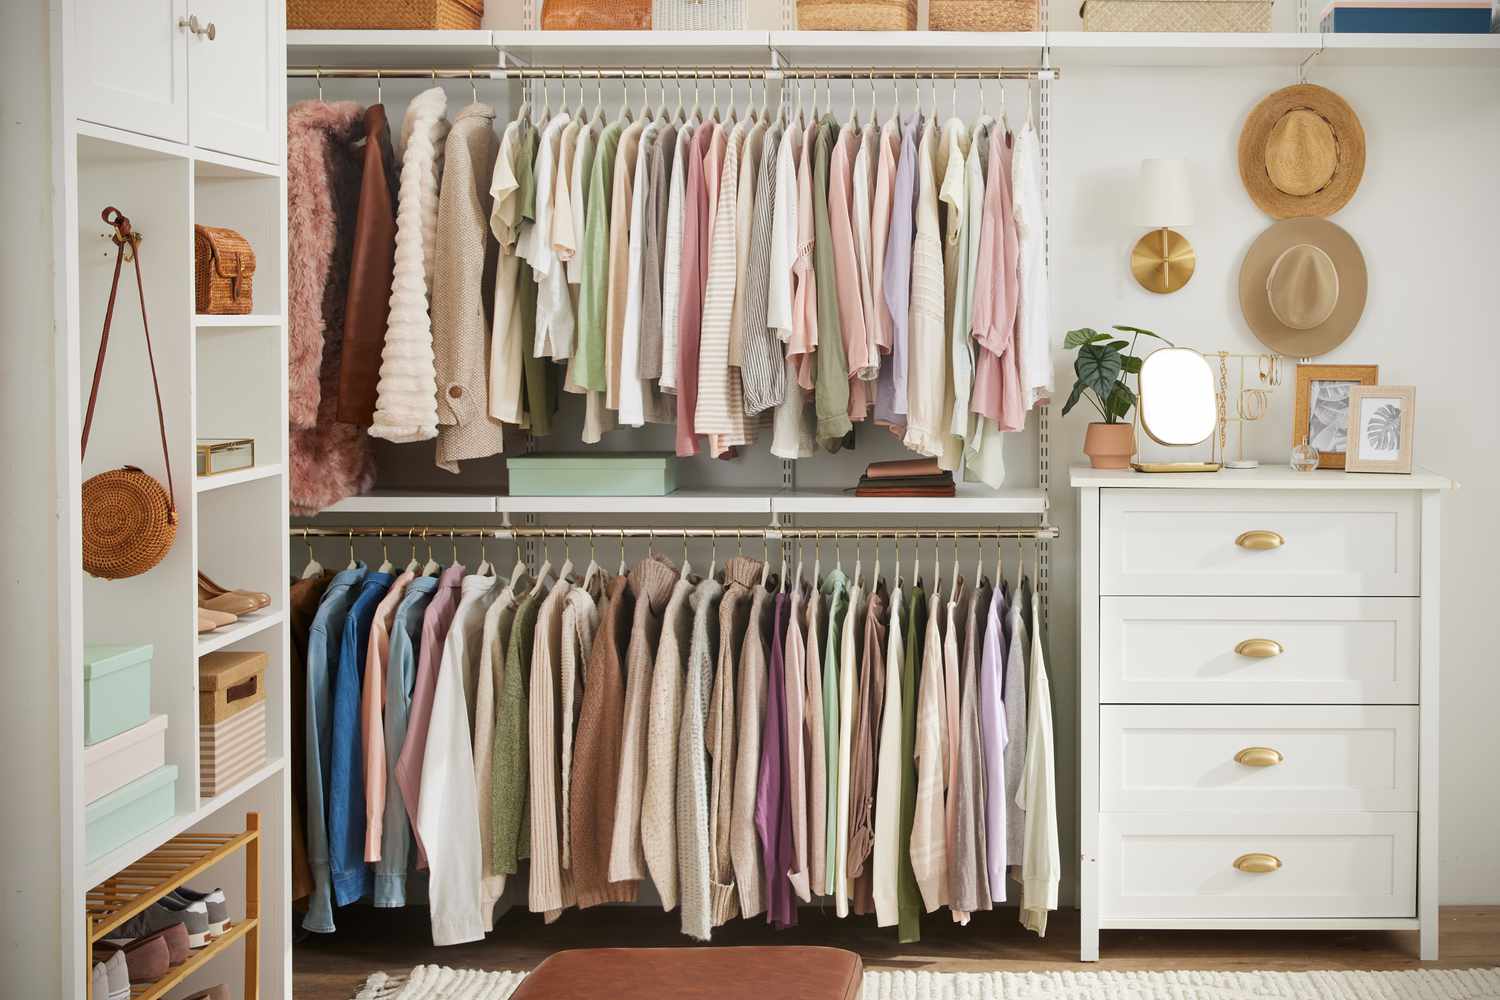 These 7 Walk-in Closets Prove That Storage Spaces Can Be Beautiful